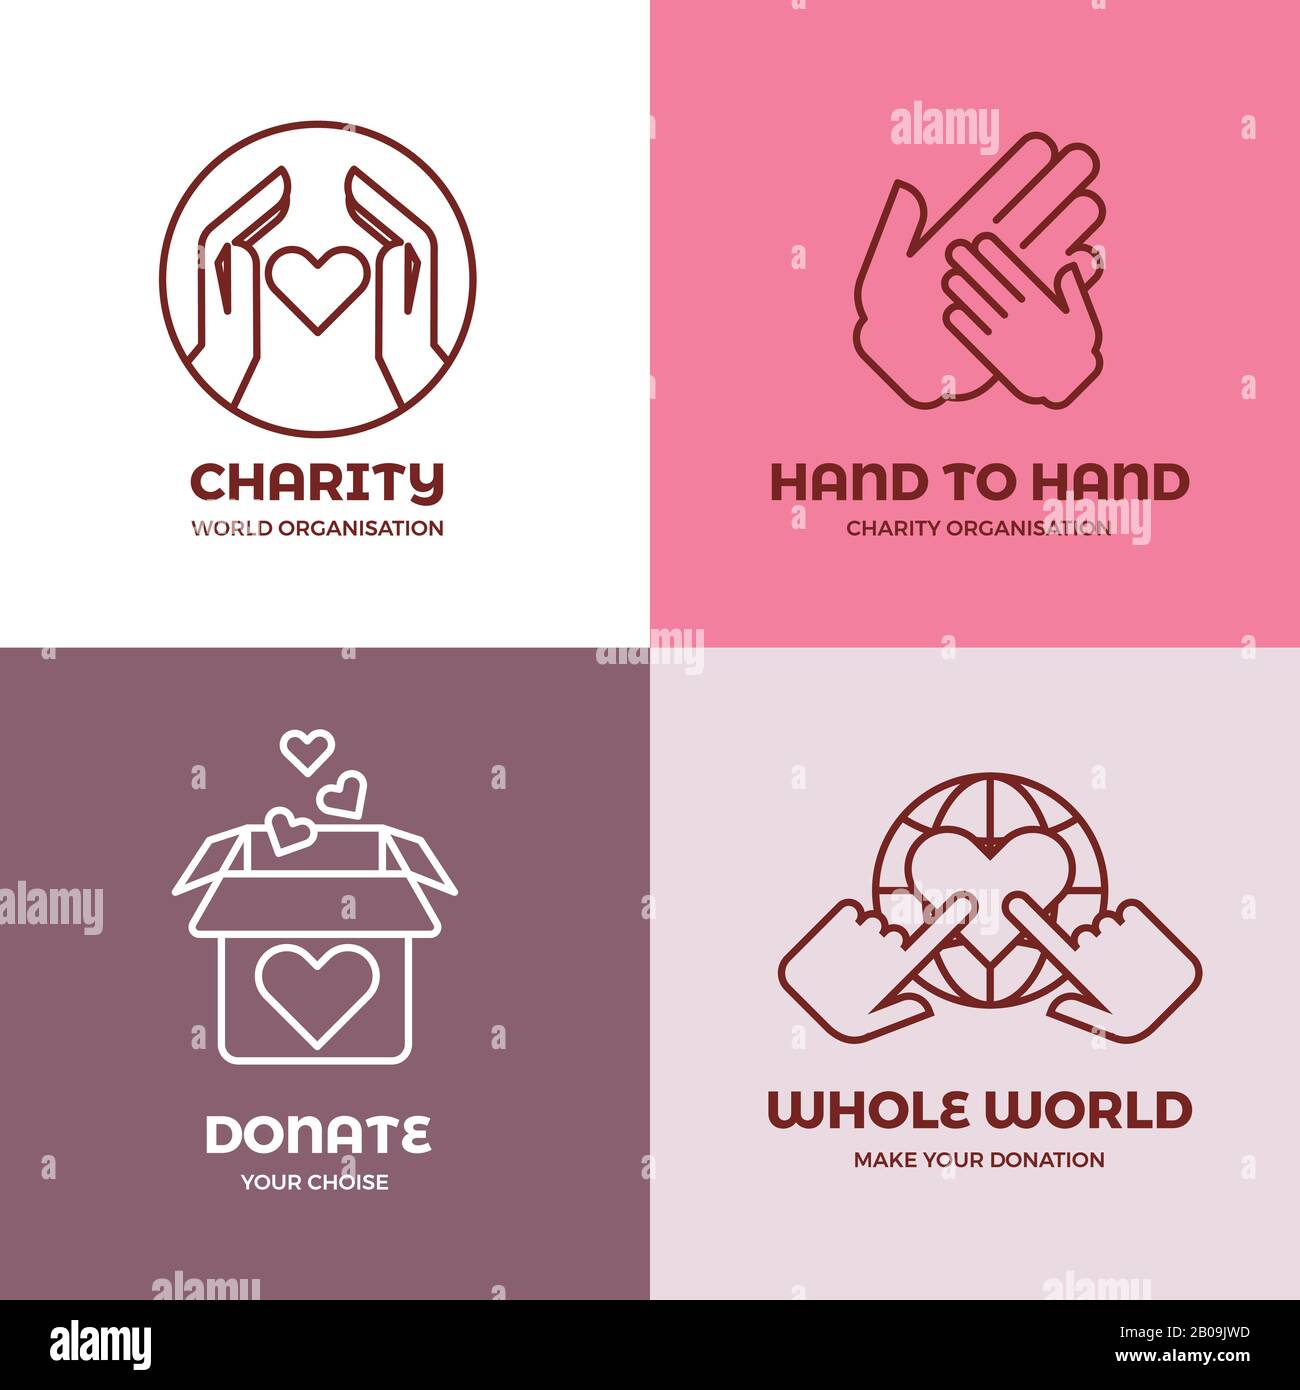 Nonprofit and volunteer organization, charity, philanthropy concept vector logo set. Concept of charity, illustration of emblems charity world organization Stock Vector